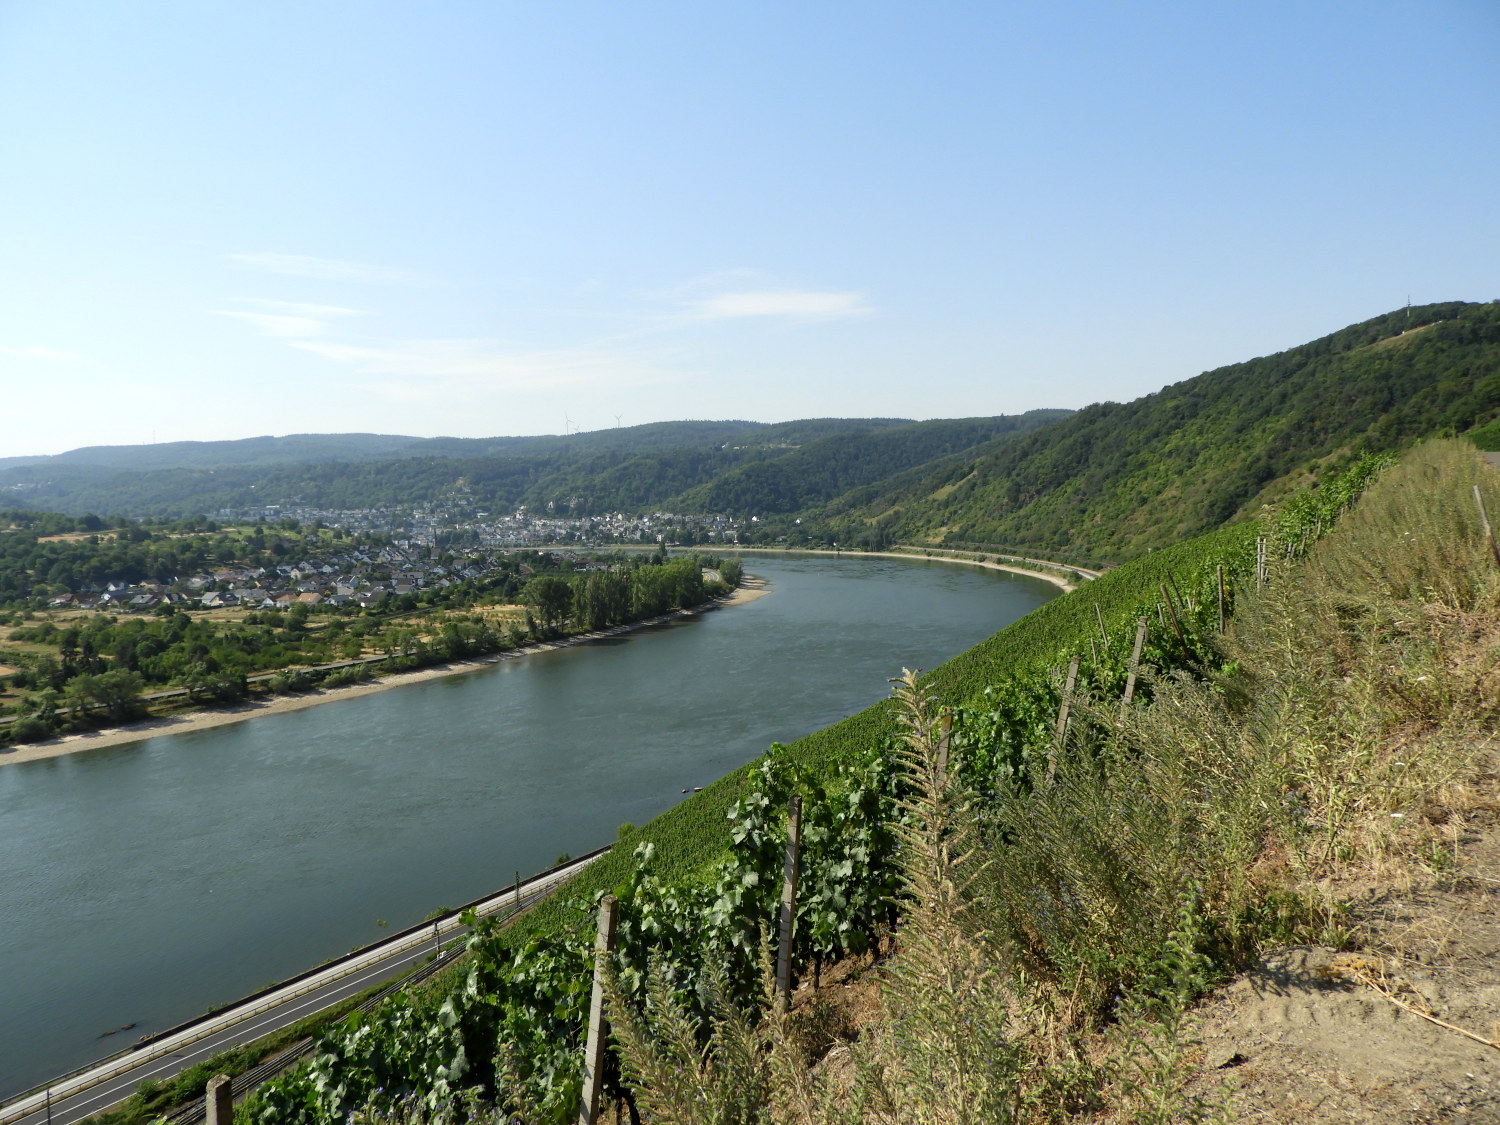 View to Boppard from Peternach